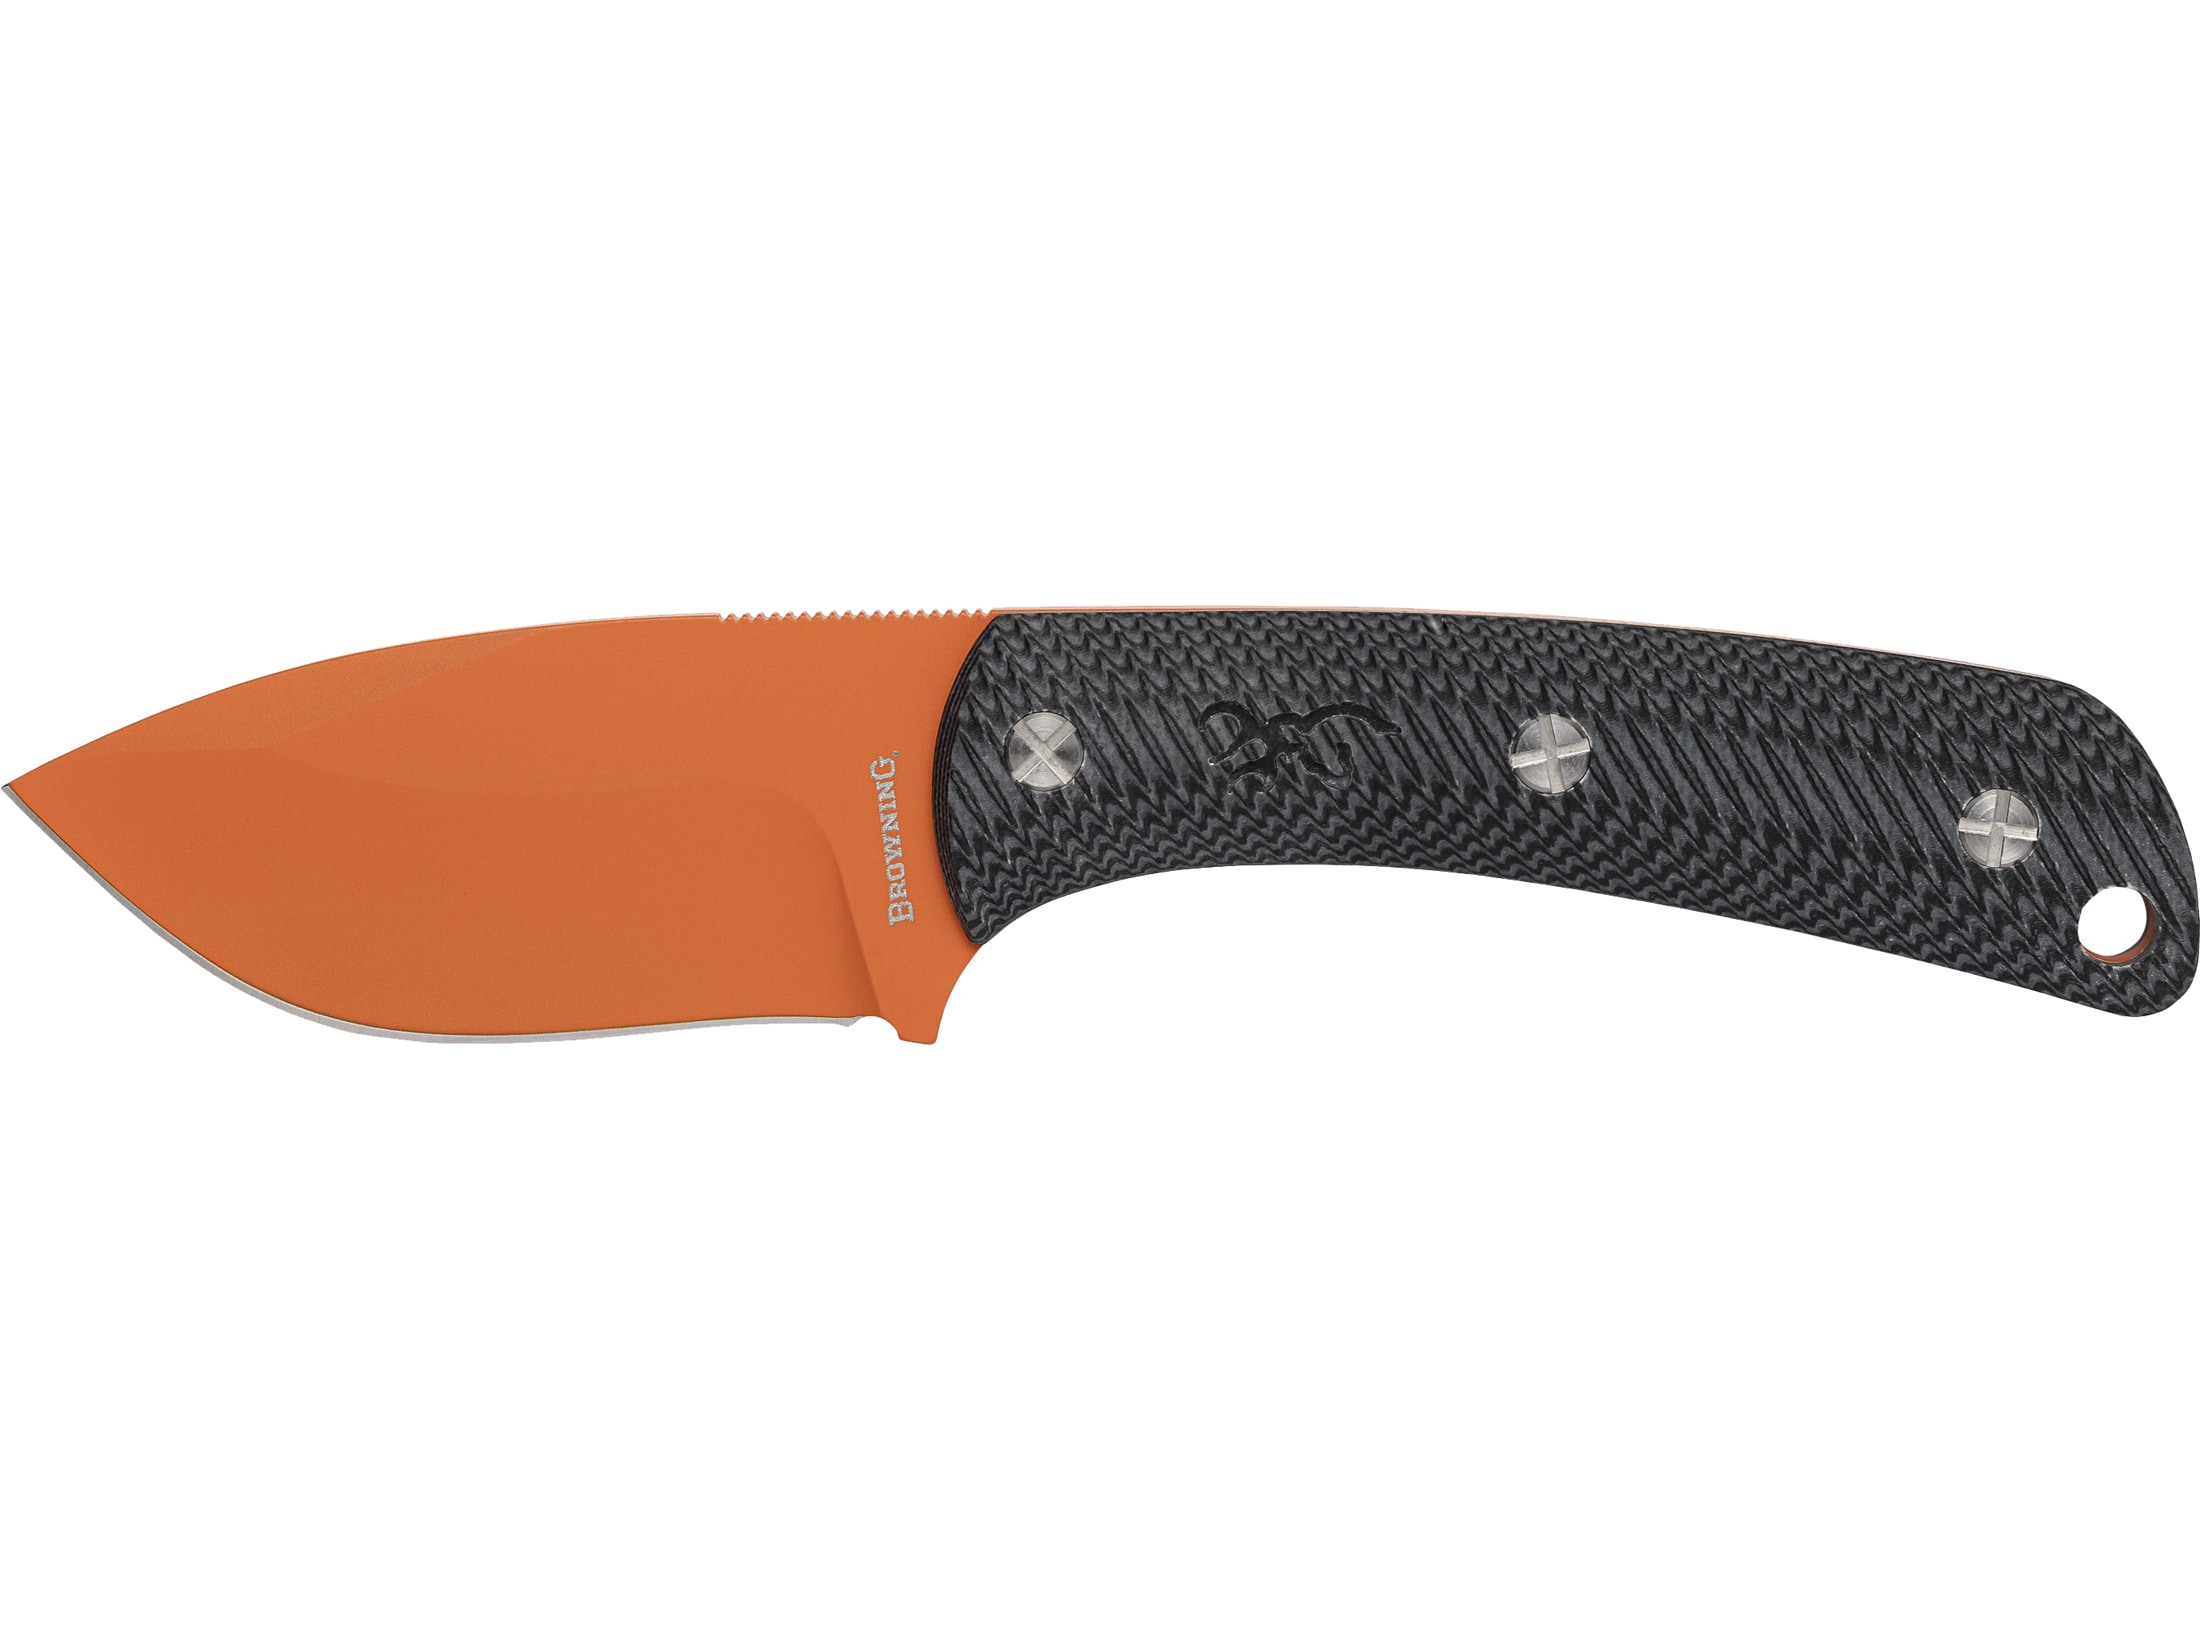 Browning Back Country Small Fixed Blade Knife 2.75 Drop Point D2